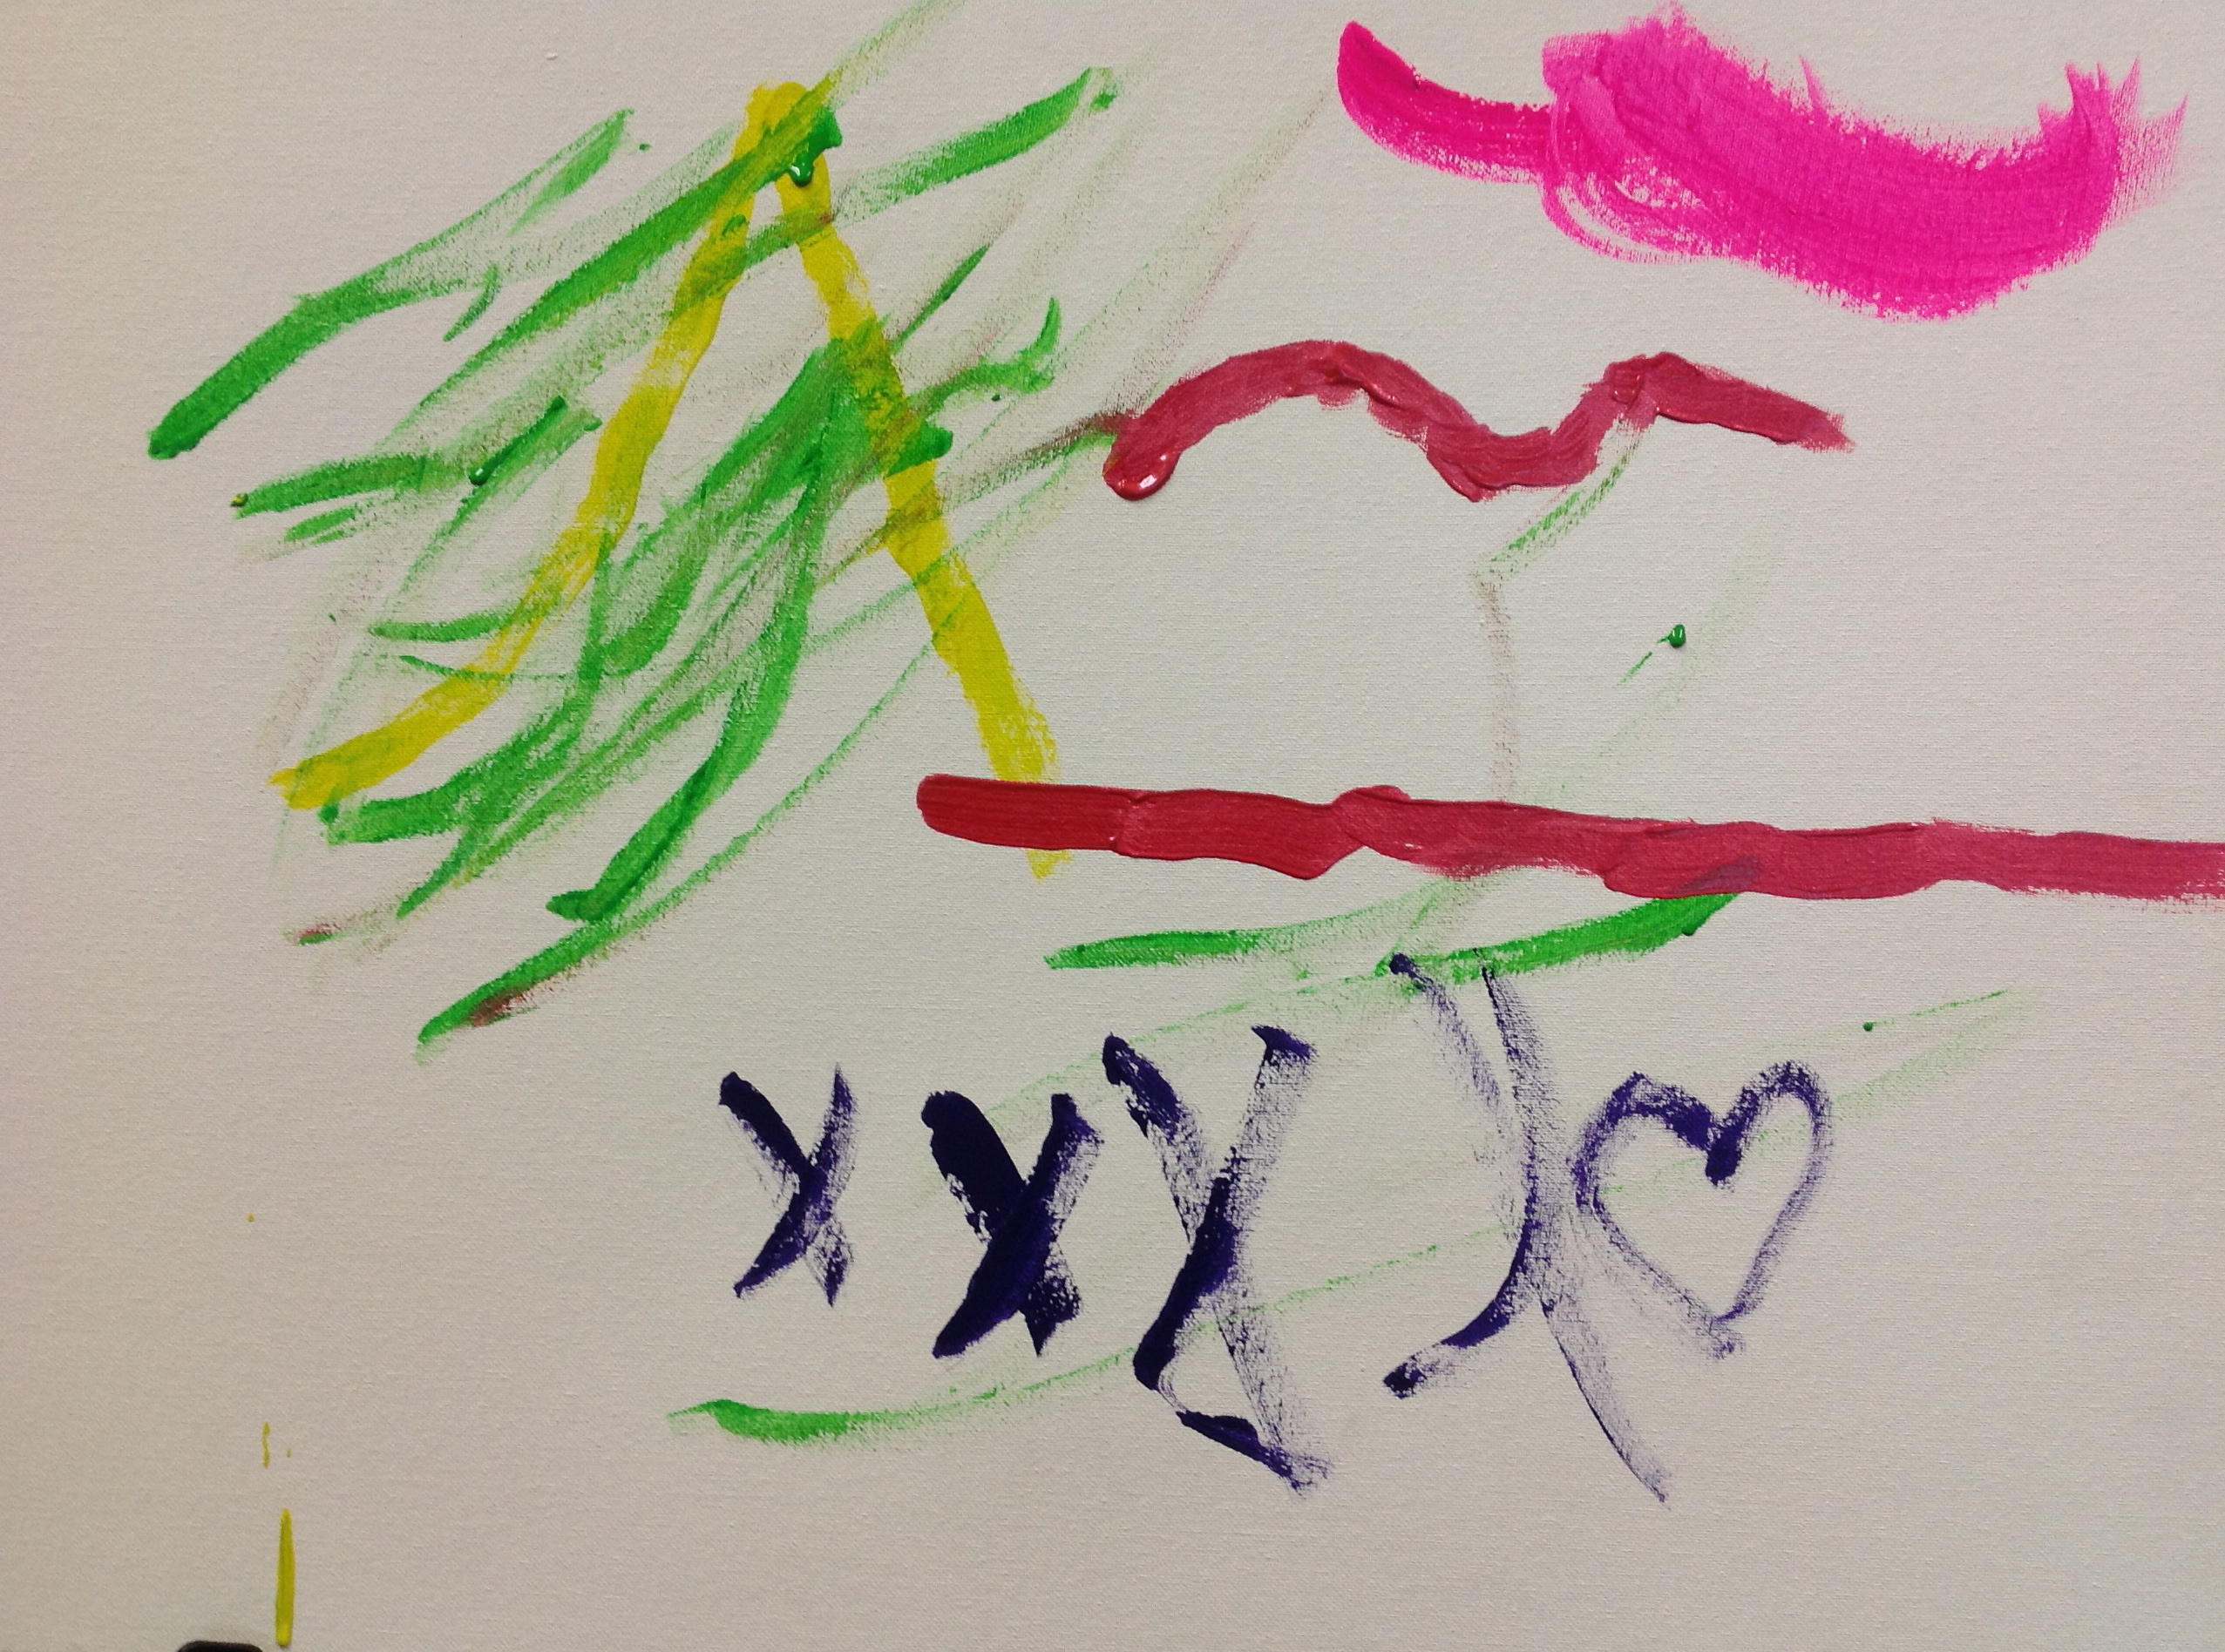 Painting created collaboratively by participants in Upstream Arts' “The Art of Relationships”